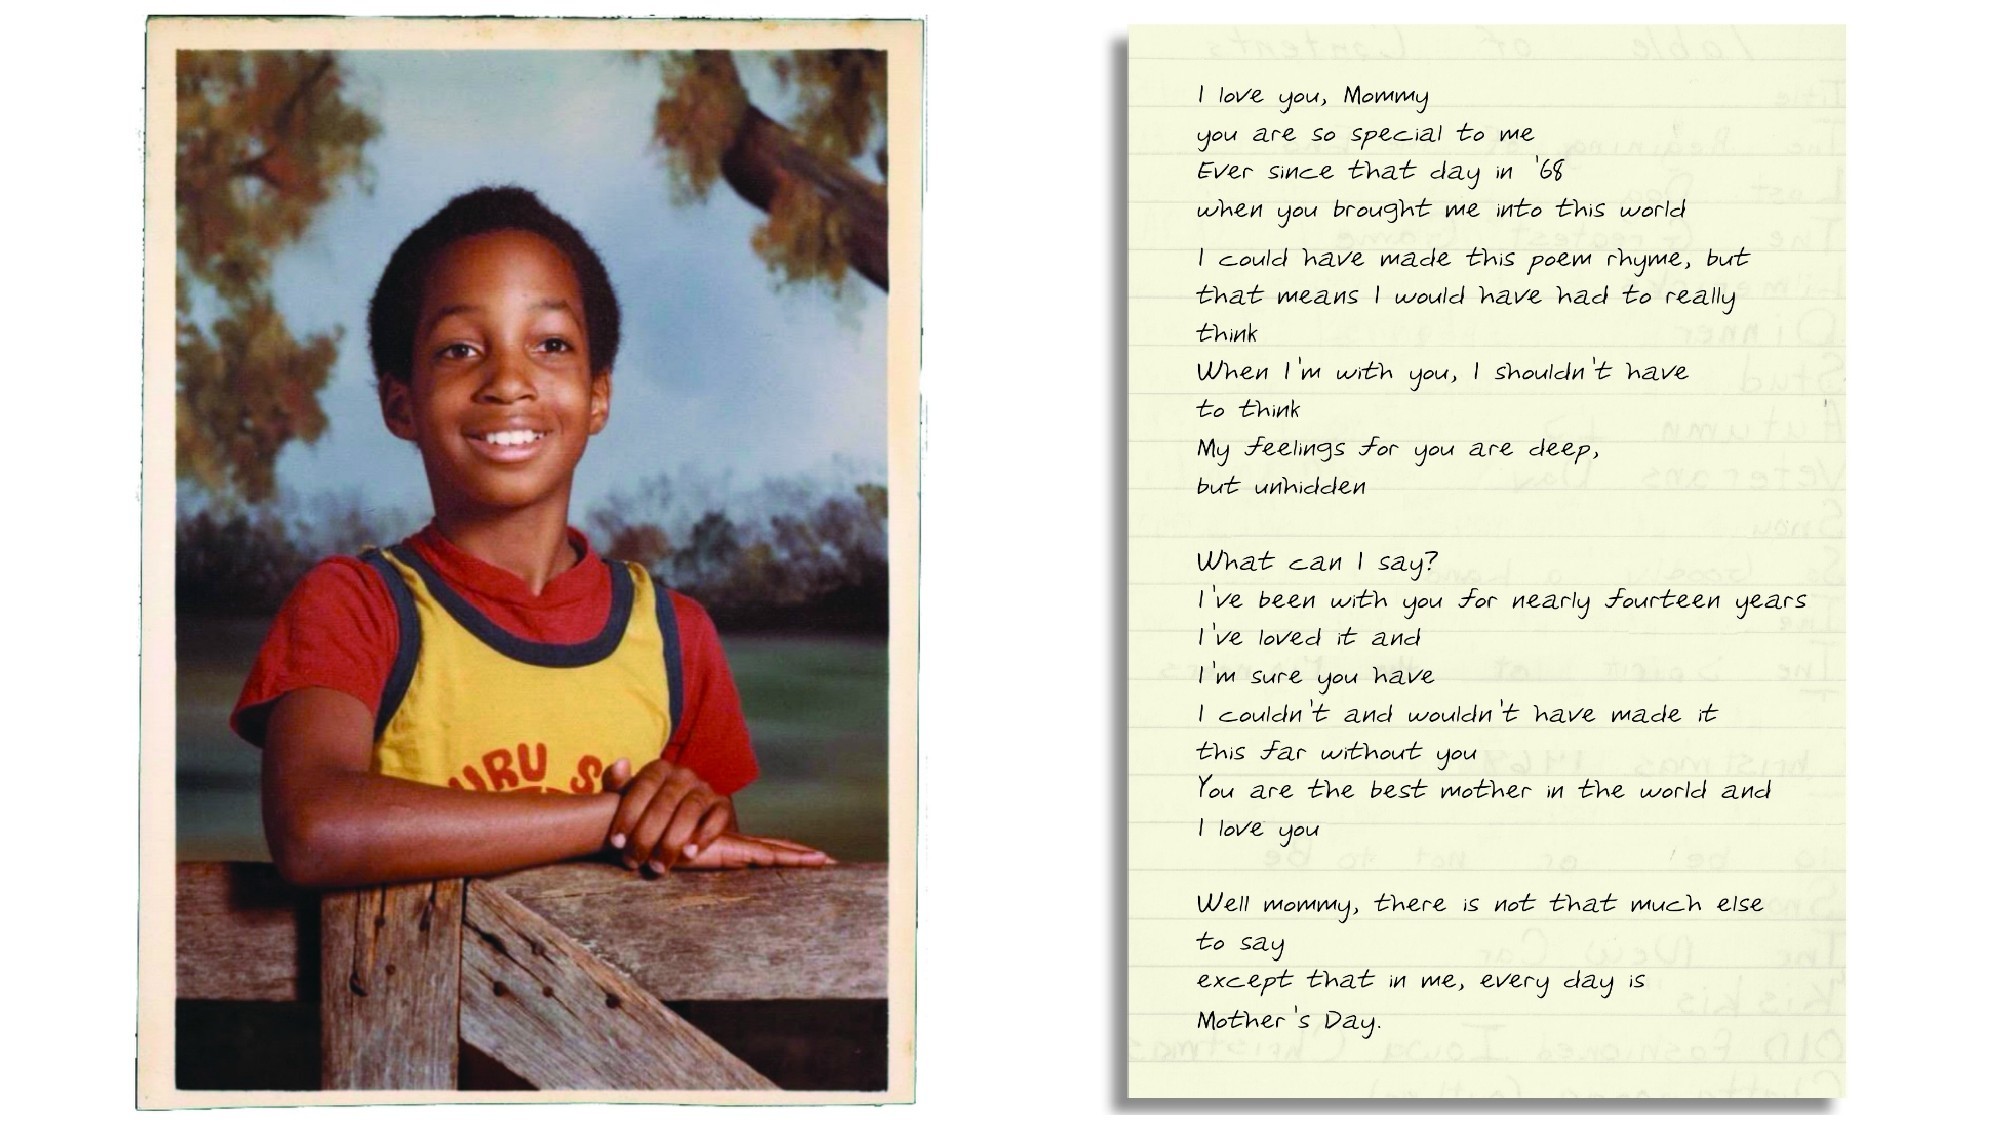 Kwame Alexander and an untitled poem